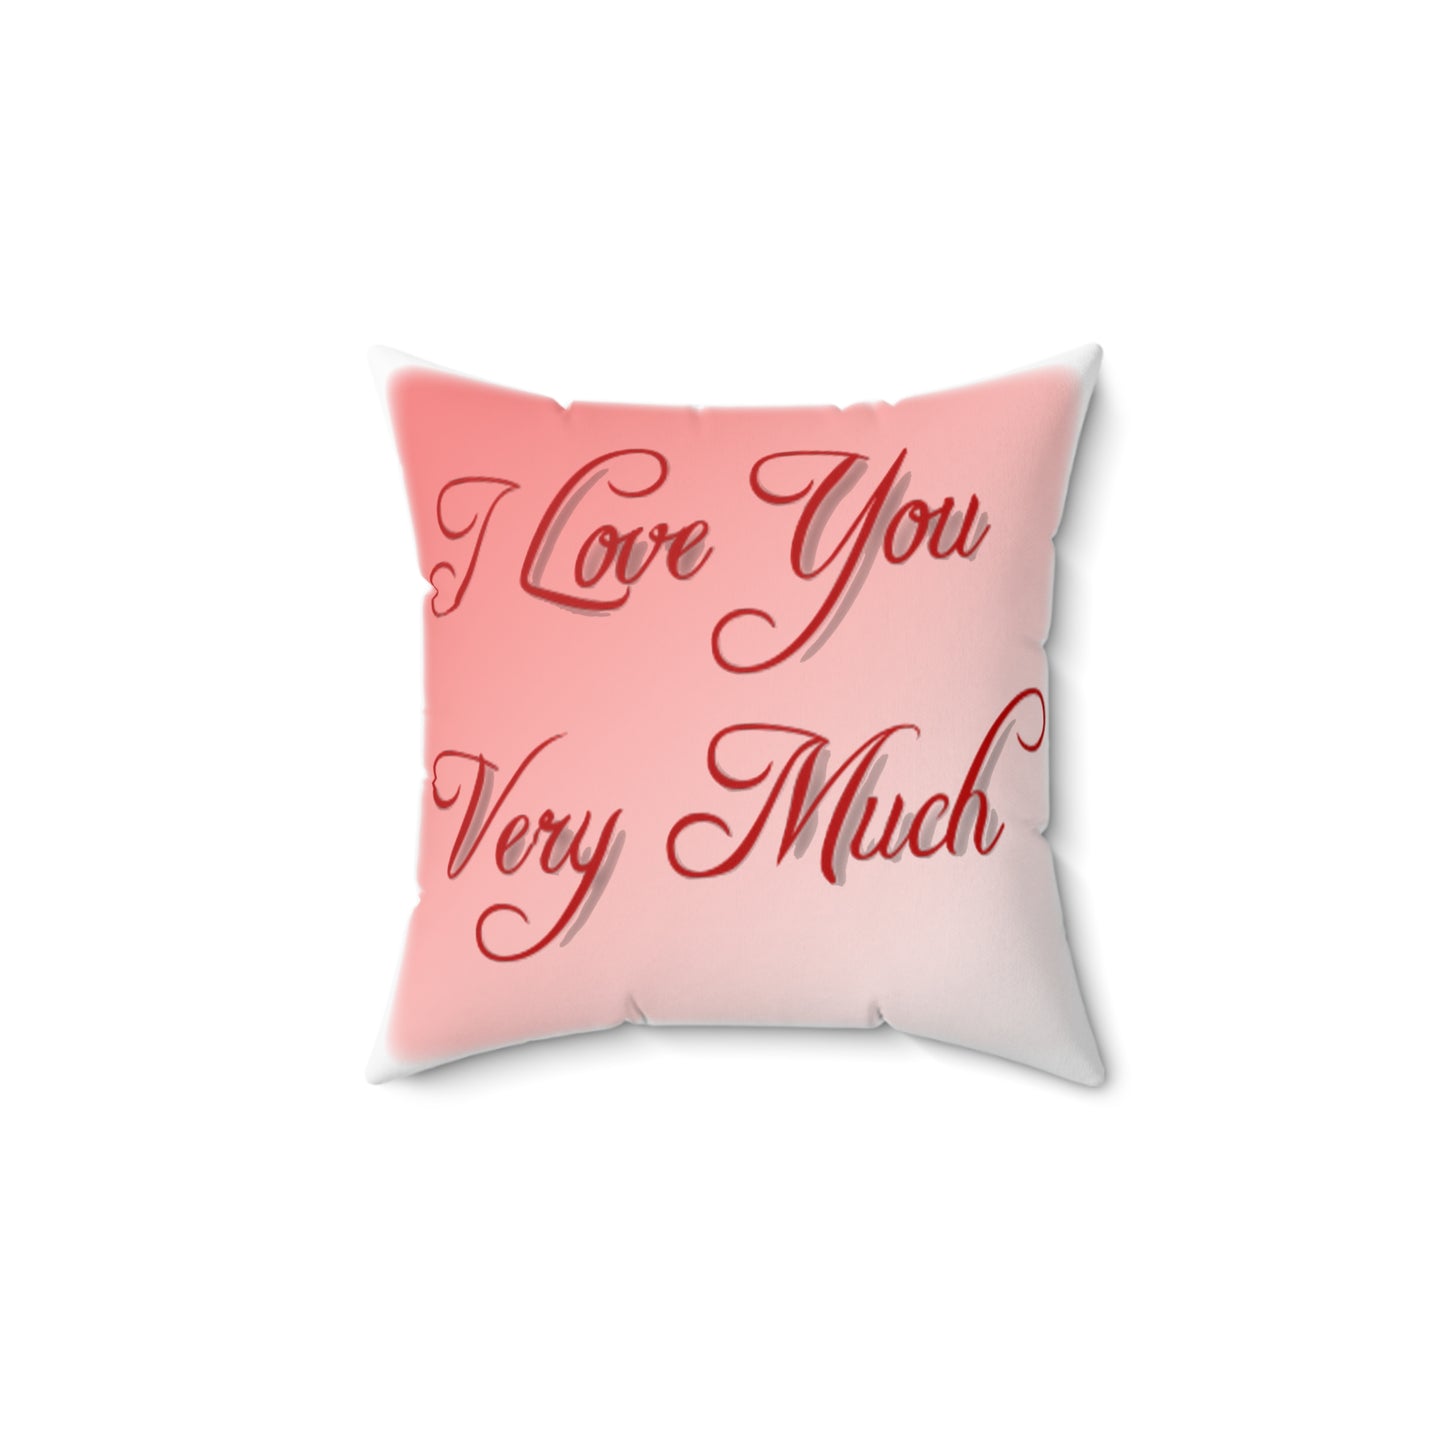 I love you Very Much Spun Polyester Square Throw Pillow